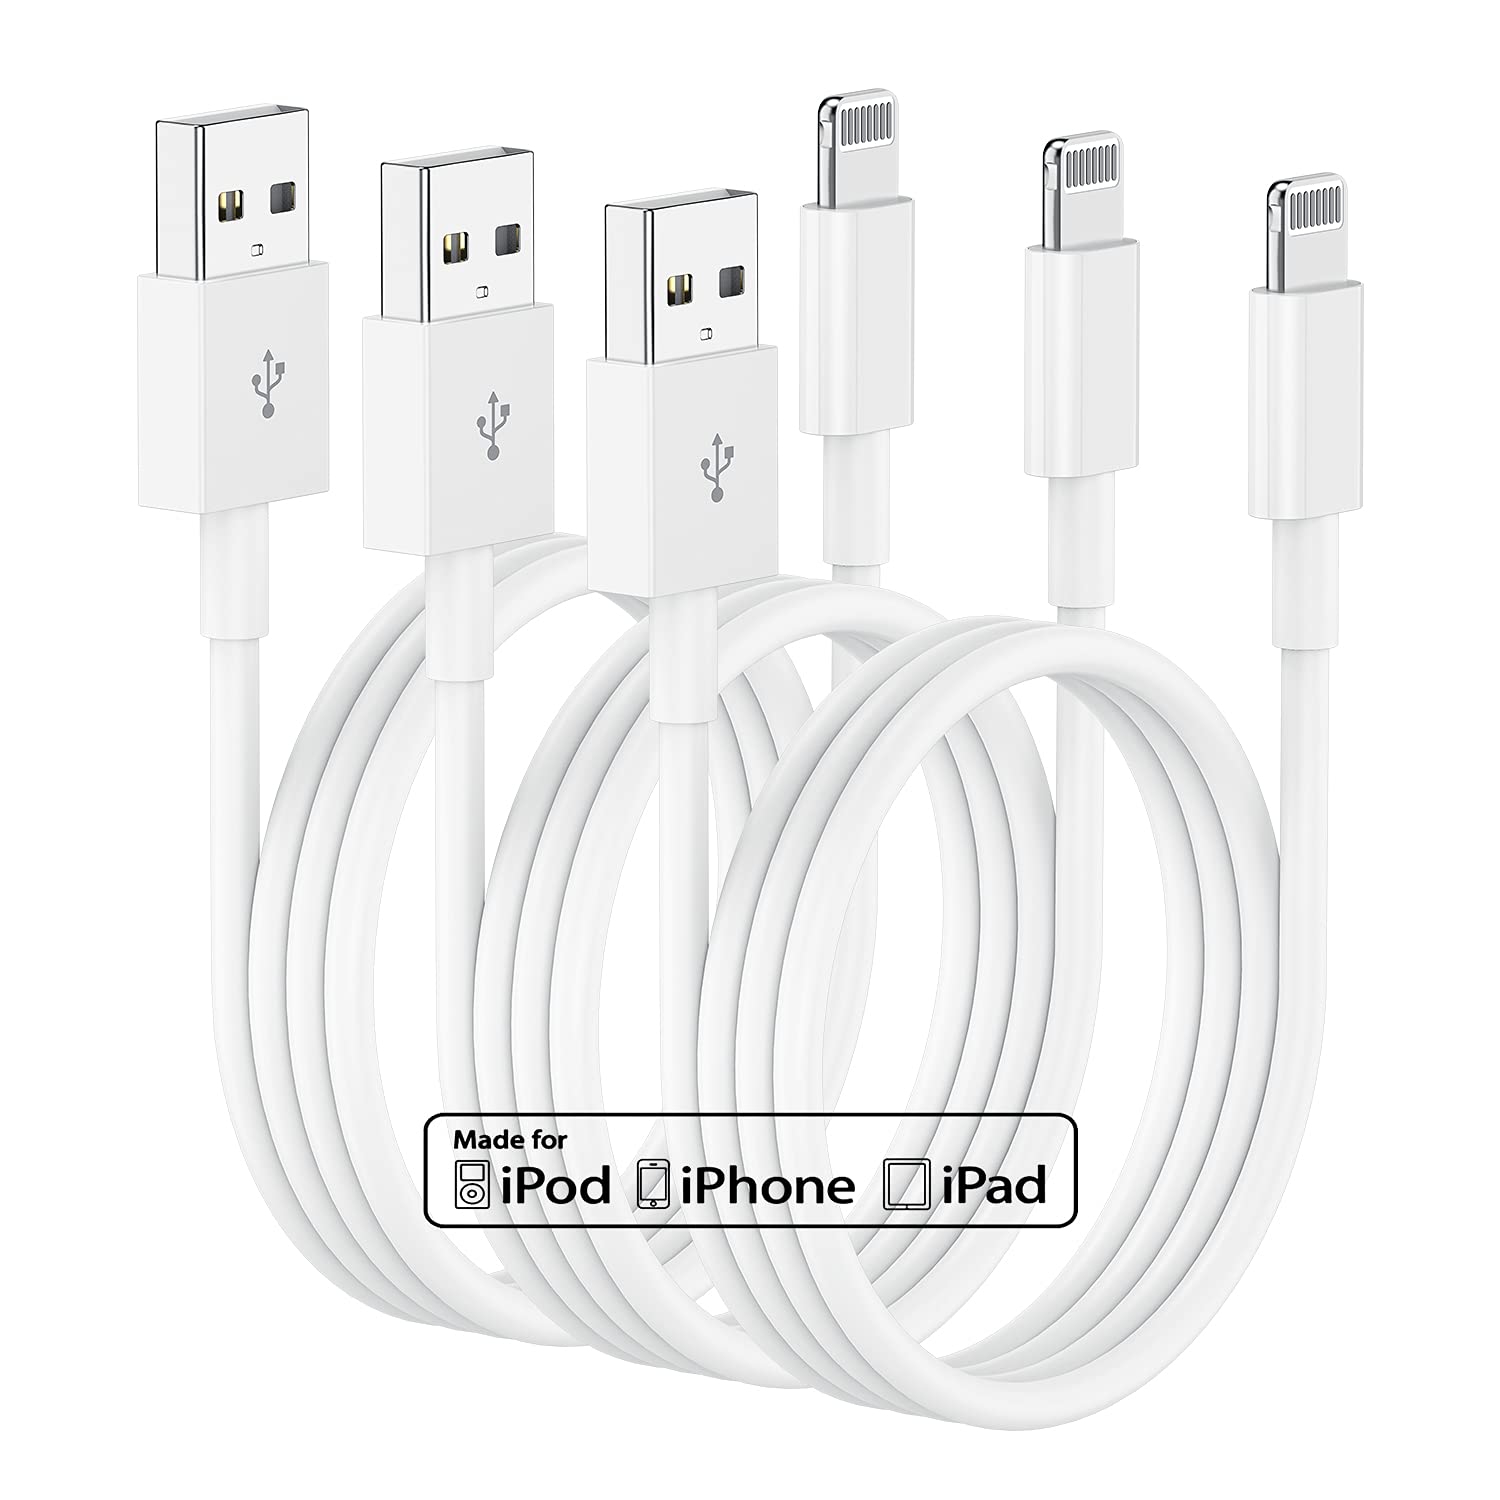 3Pack iPhone Charger Cord 10ft, [MFi Certified] Long Apple Charging Cable,10 Feet Original Lightning to USB Cable, iPhone Charging Cables for iPhone 13 Mini/12/11/Pro/XS/MAX/XR/8/